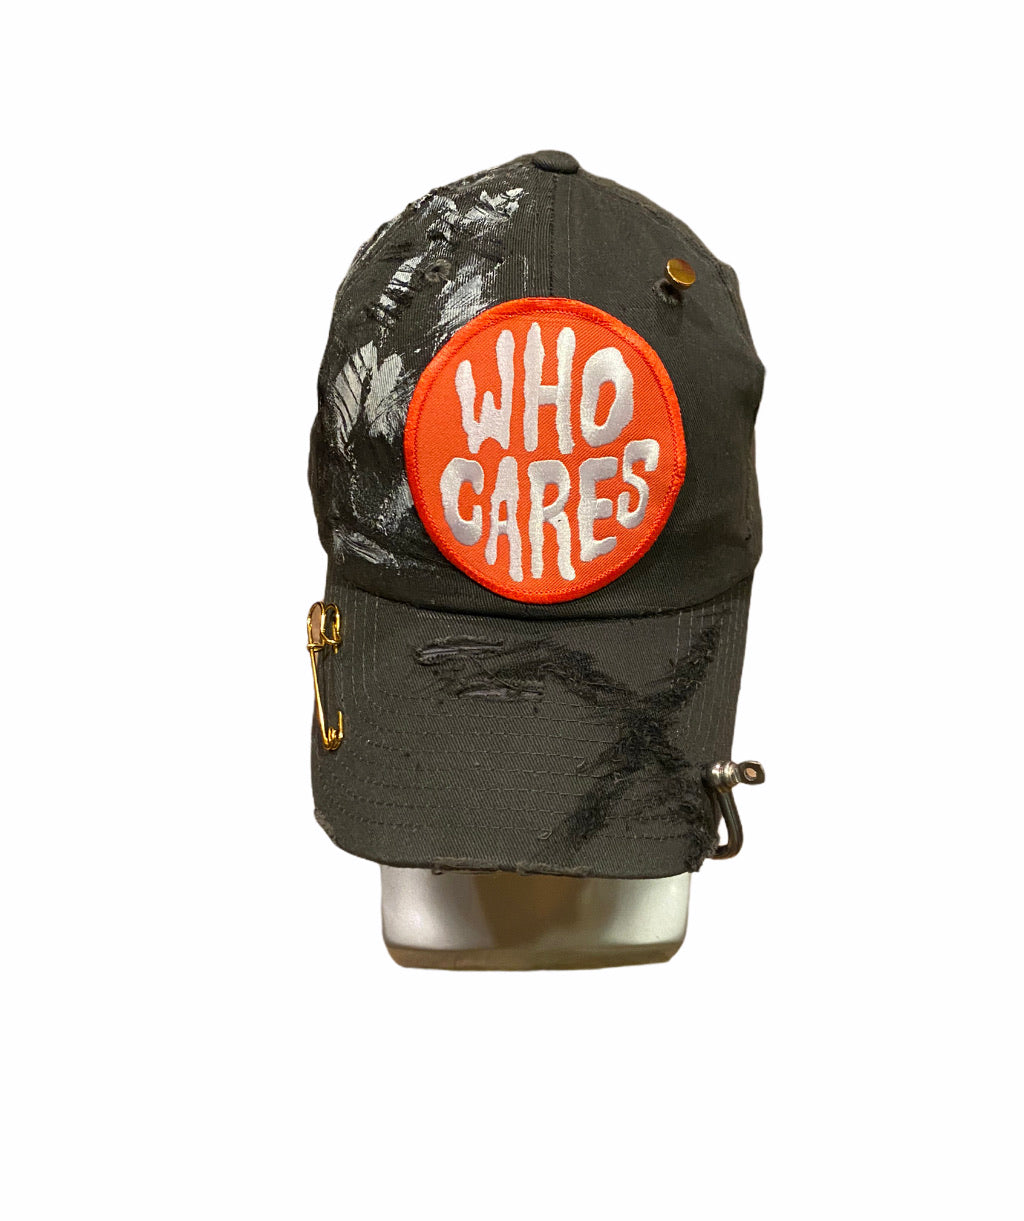 AWOL Exclusive ART X Who cares